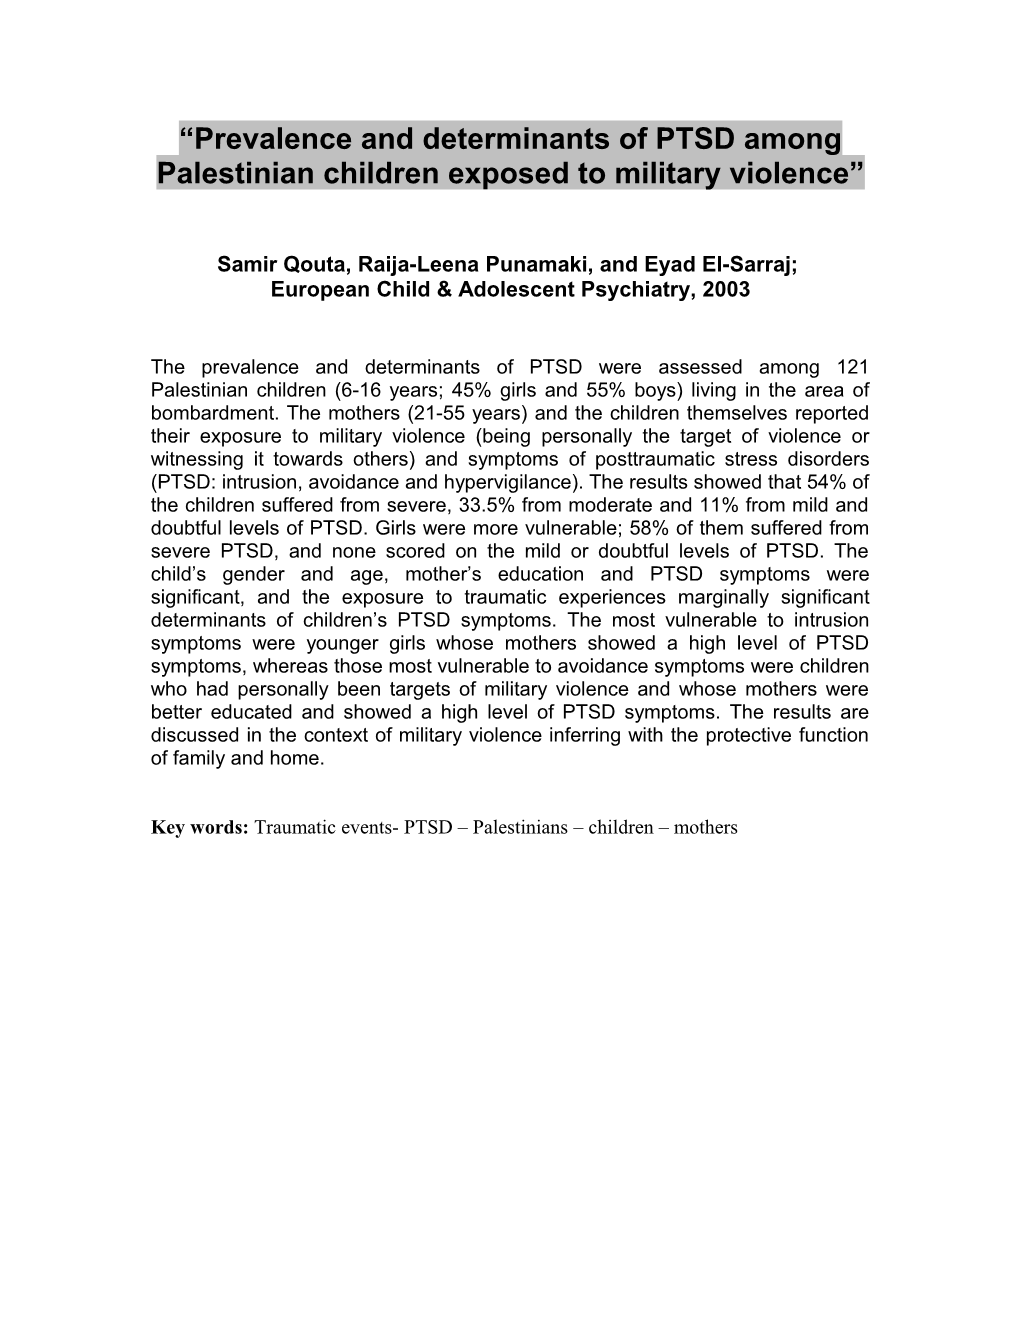 Prevalence of Determinants of PTSD Among Palestinian Children Exposed to Military Violence